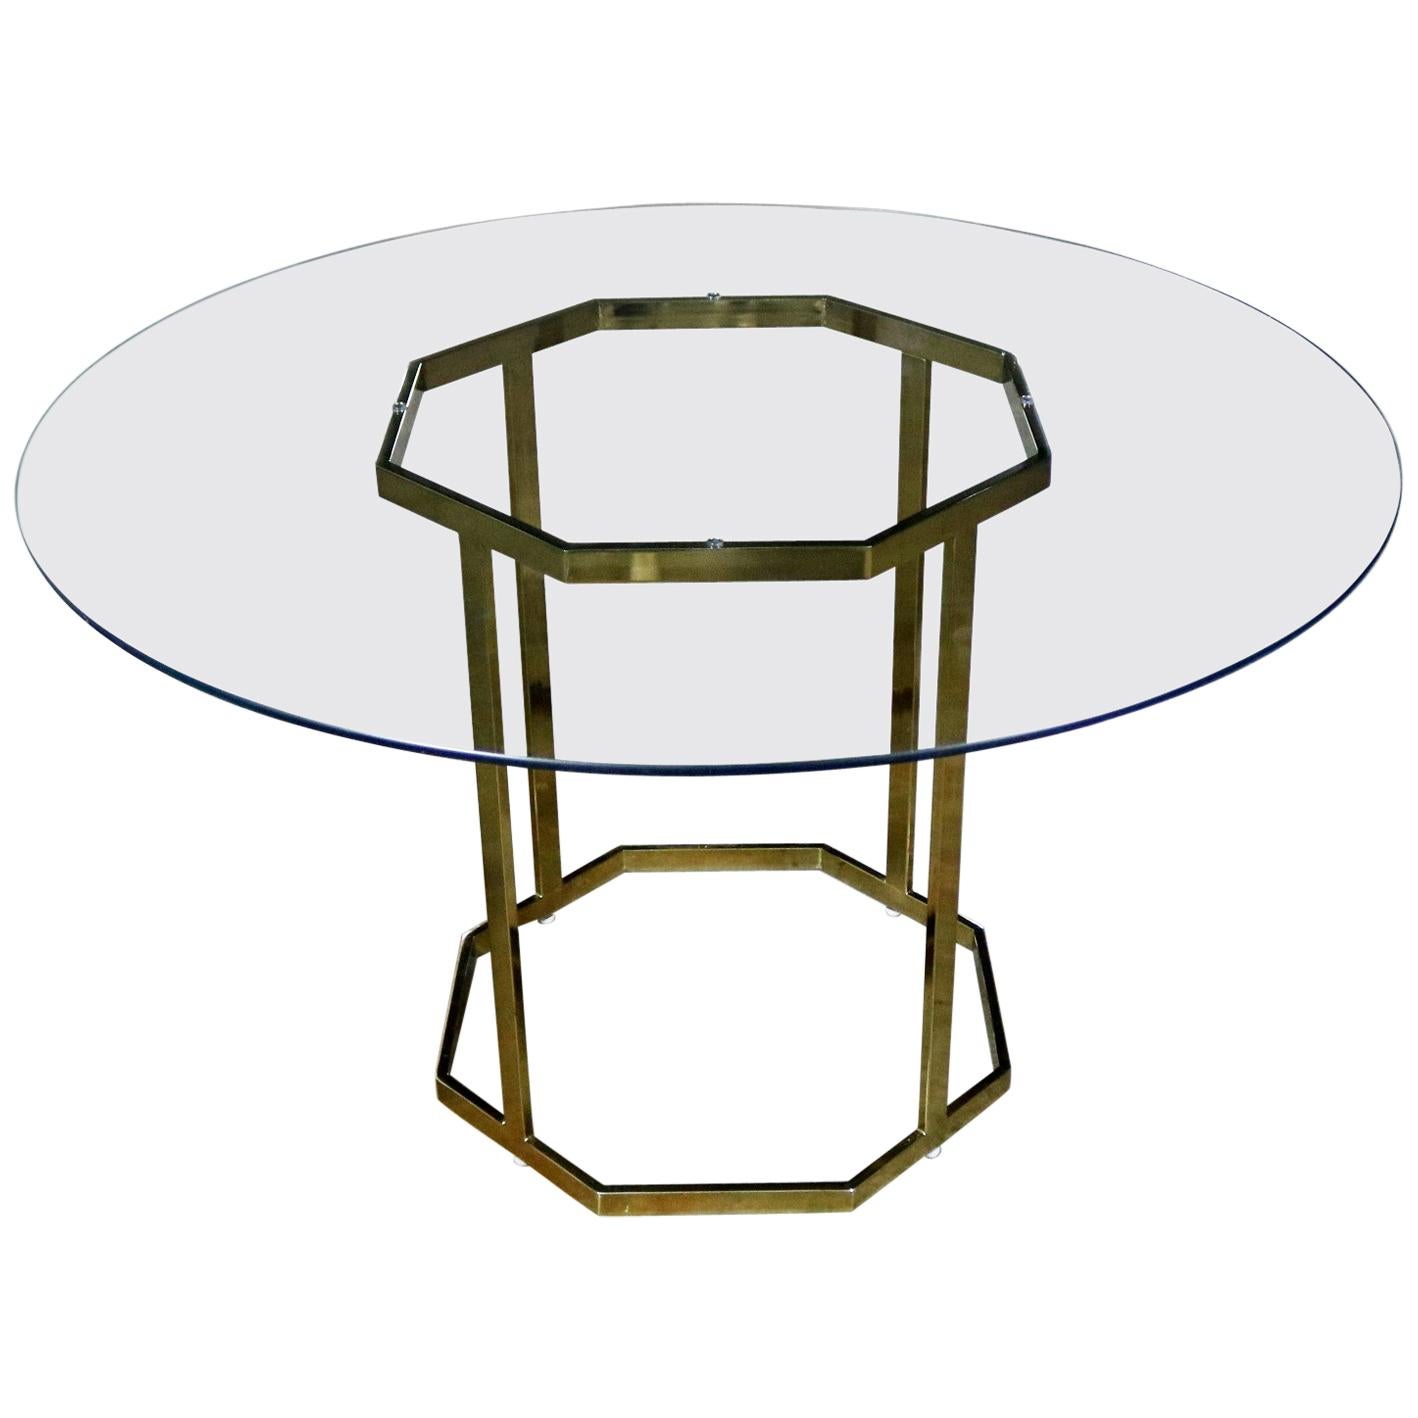 Milo Baughman Style Octagon Brass-Plated Metal Dining Table with Round Glass Top